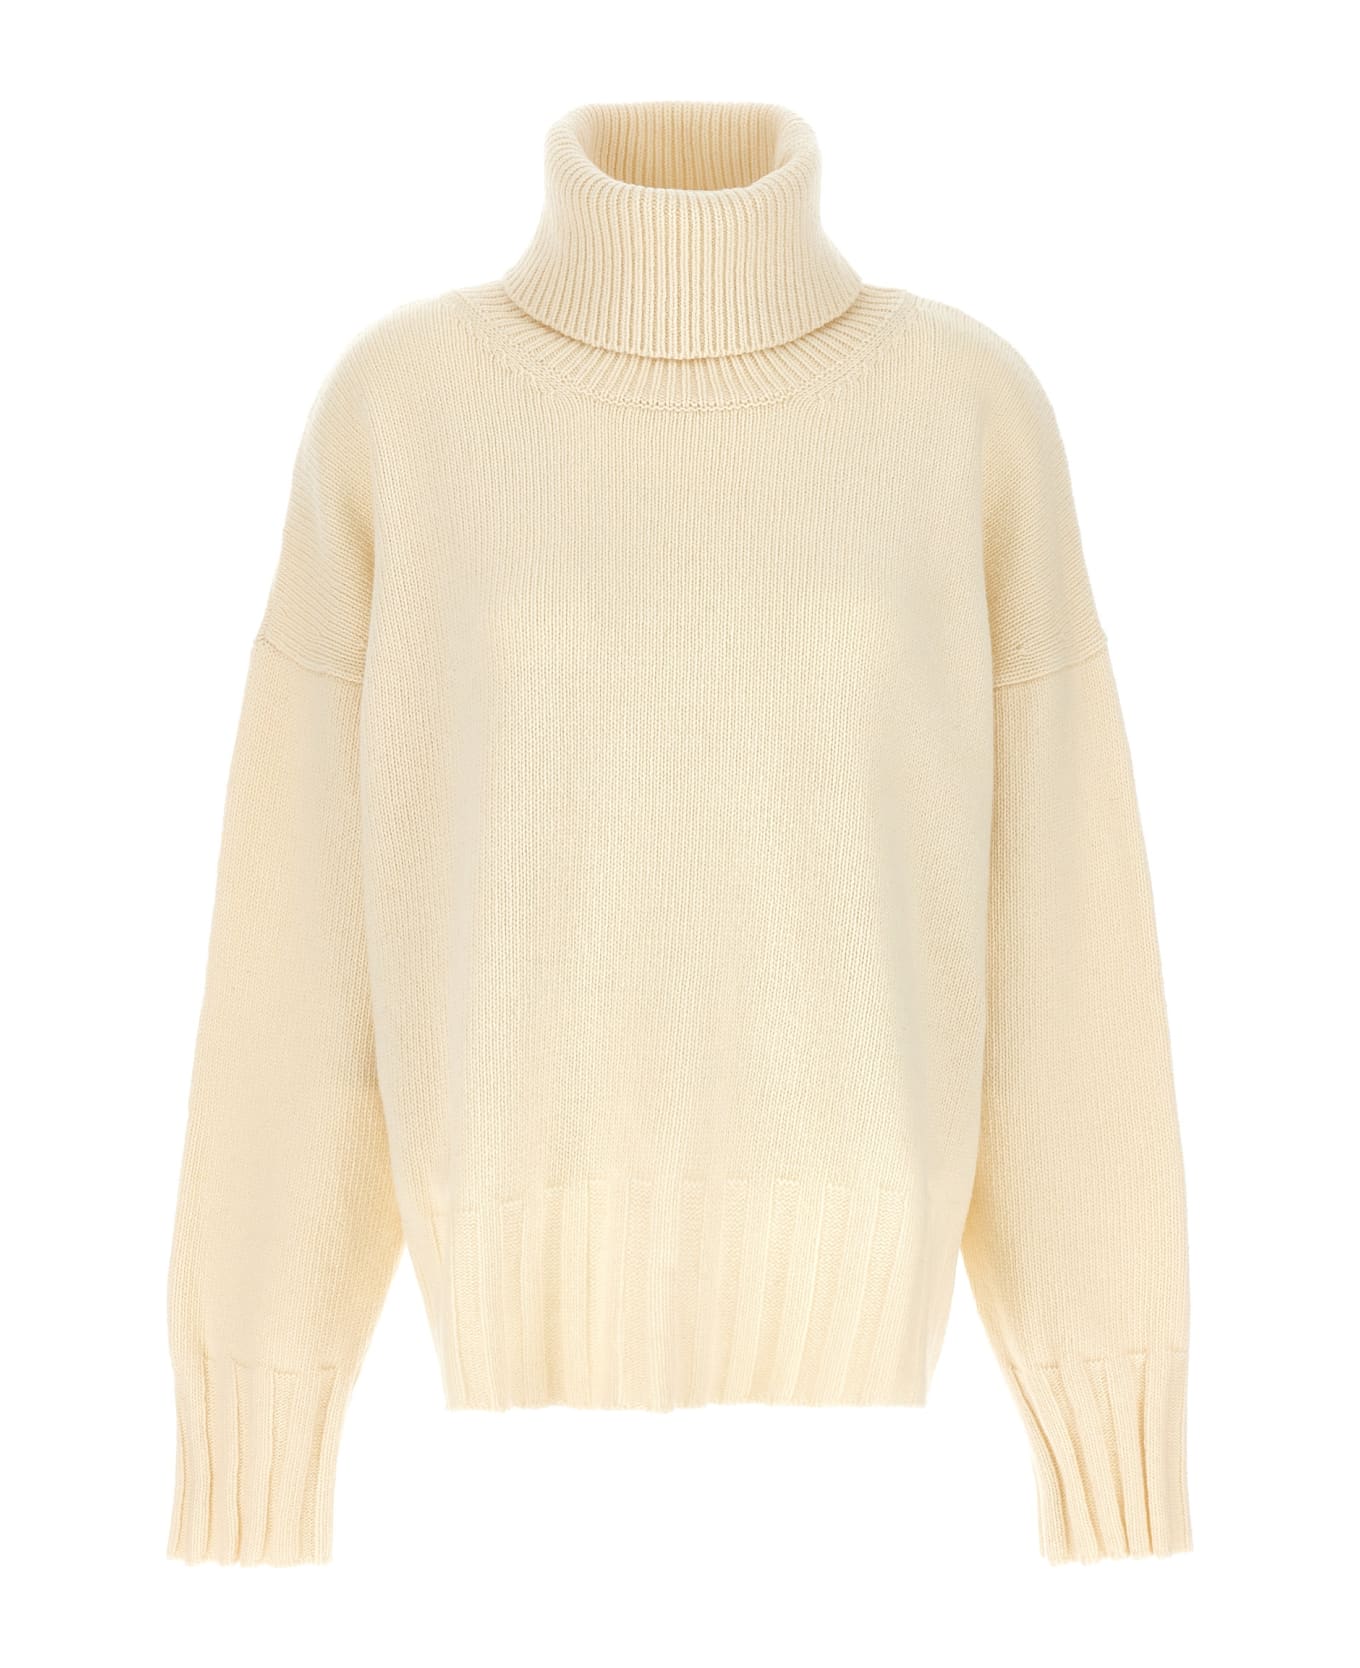 Made in Tomboy 'ely' Sweater - White